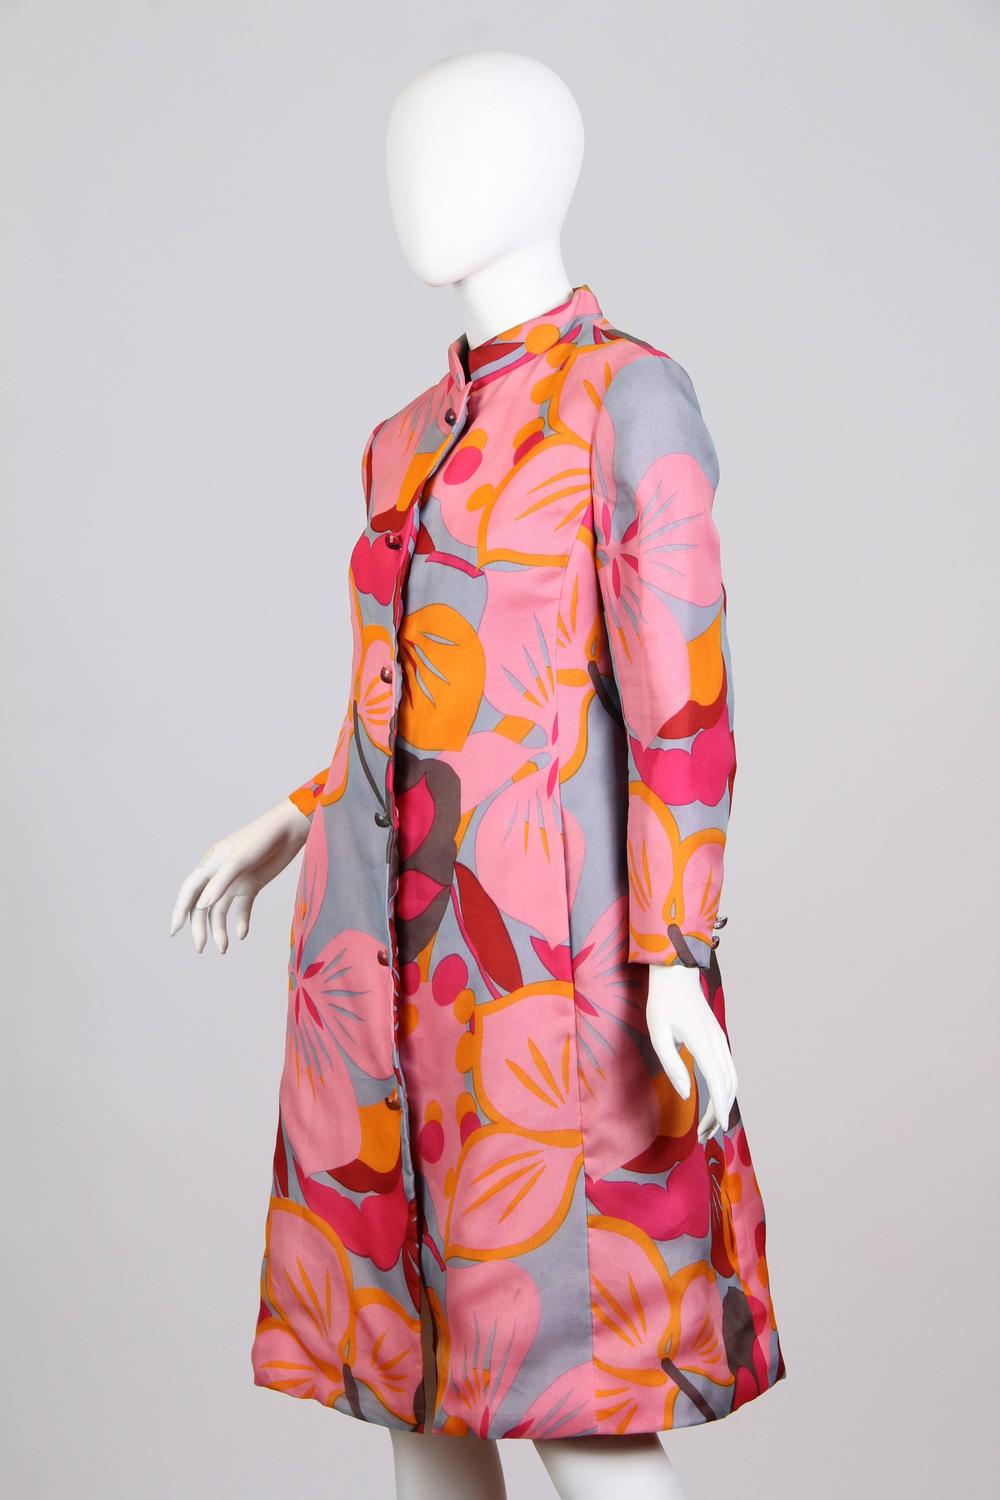 1960s Bill Blass Floral Coat For Sale at 1stdibs